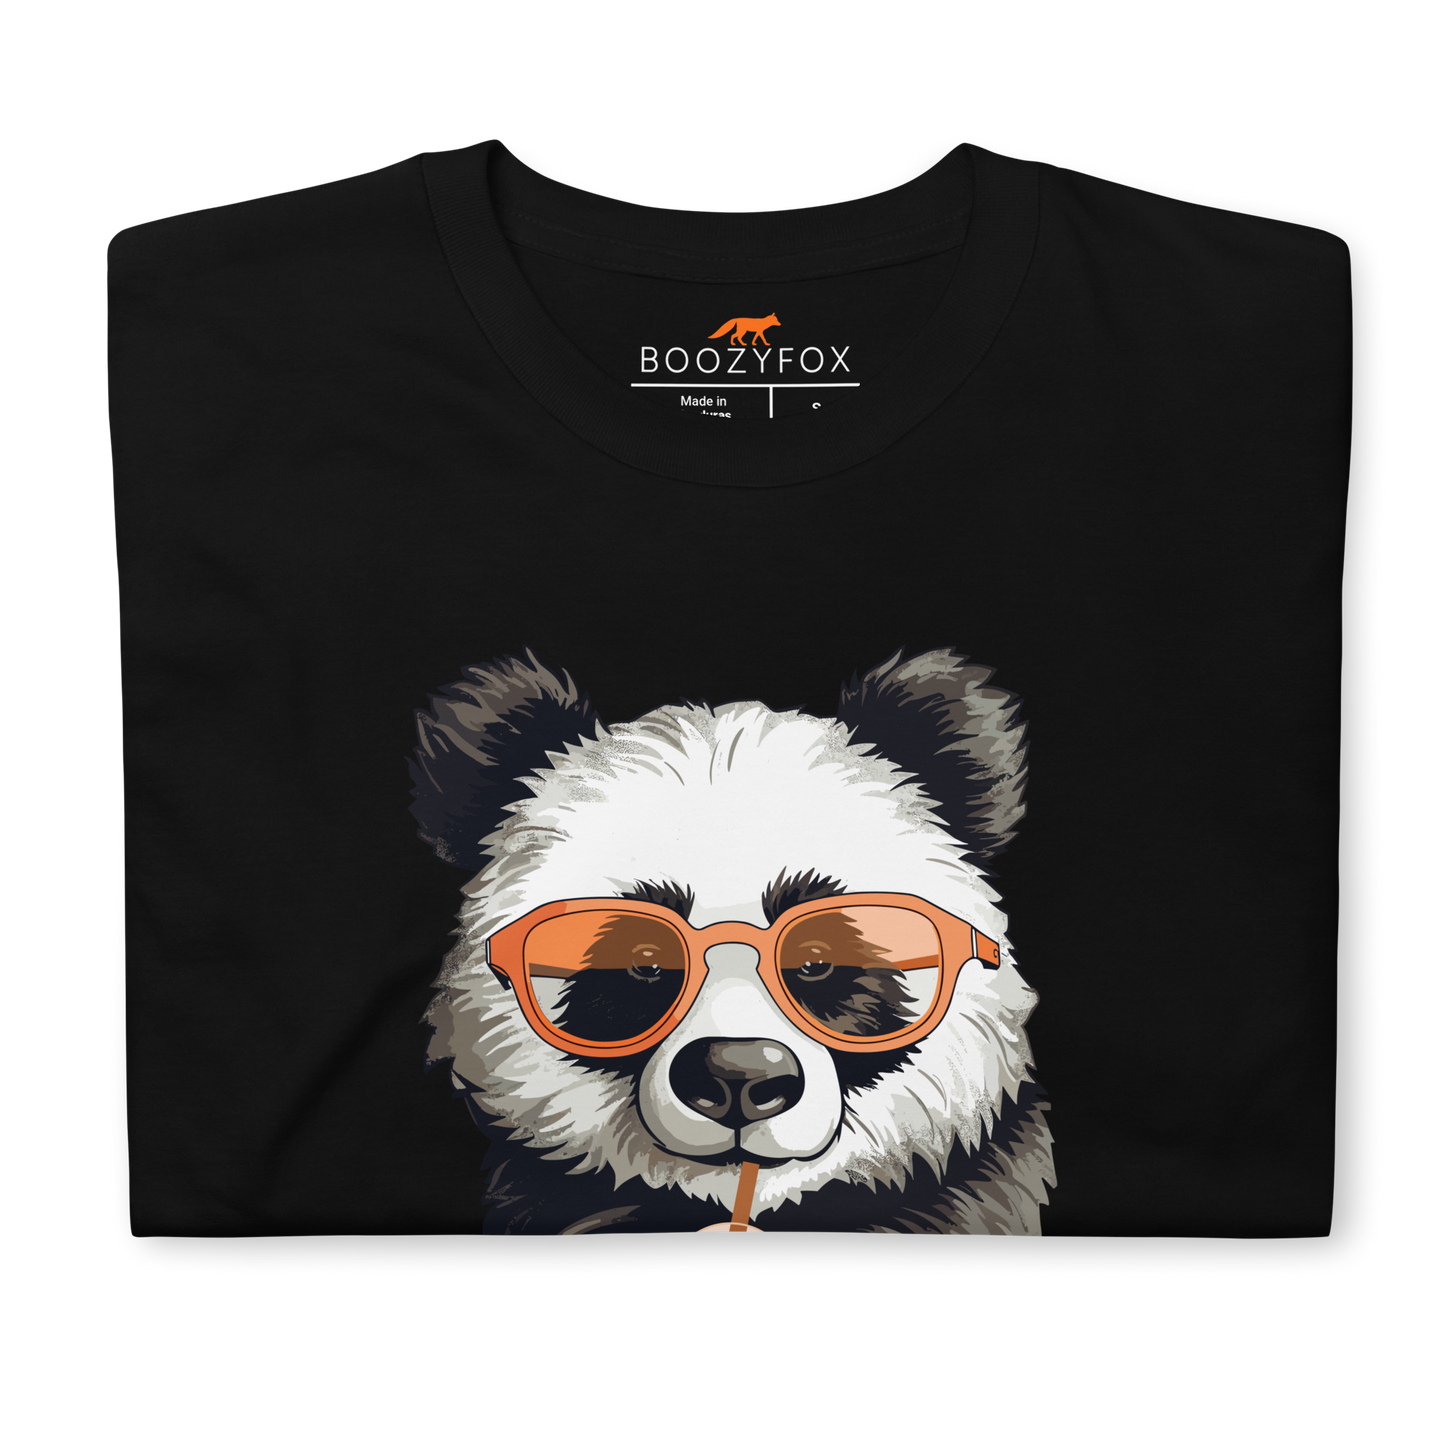 Front details of a Black Panda T-Shirt featuring an adorable Eat, Sleep, Panda, Repeat graphic on the chest - Funny Graphic Panda T-Shirts - Boozy Fox